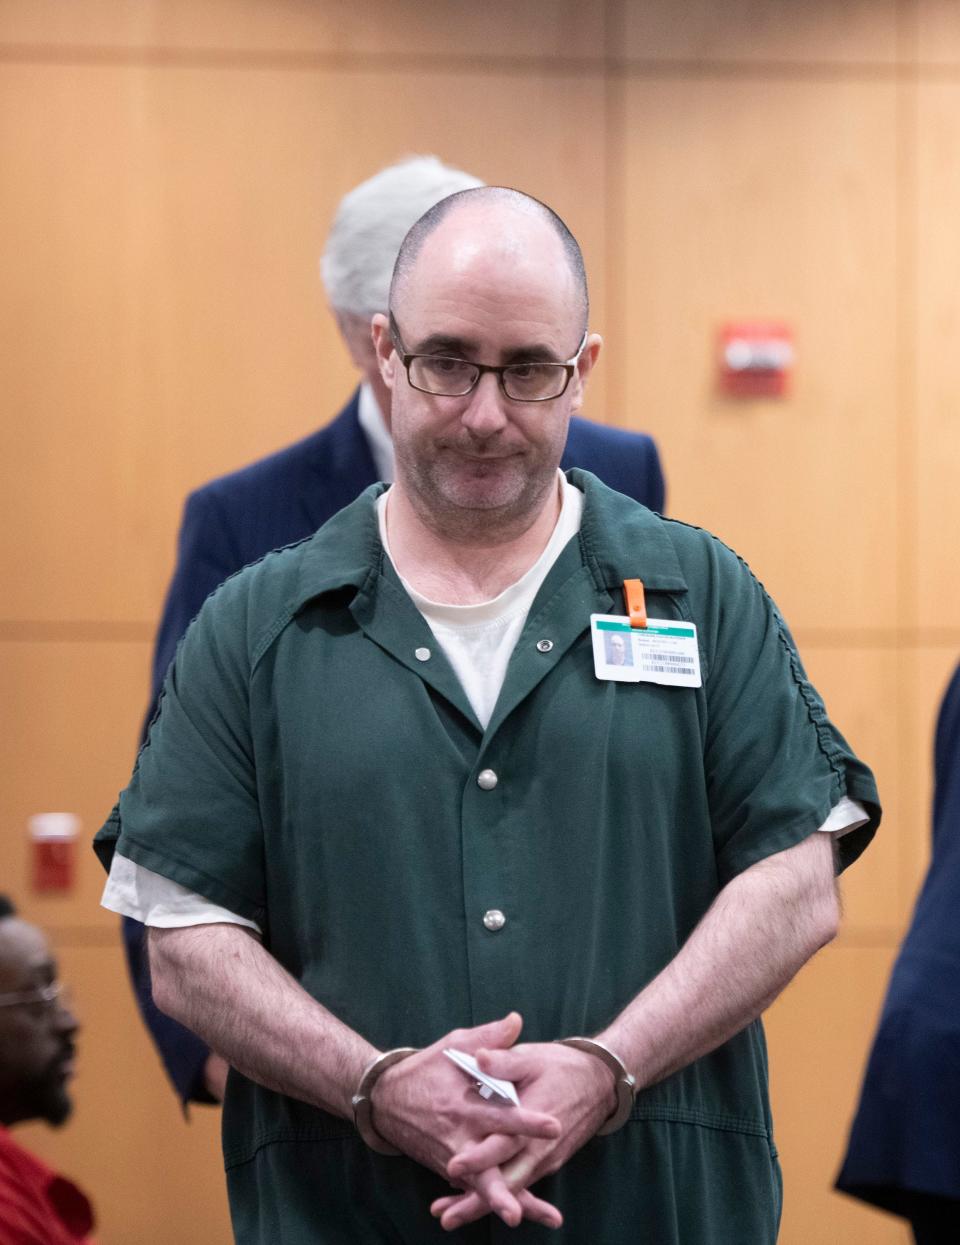 Fallon Coburger appears before Circuit Court Judge Coleman Robinson for sentencing on possession of child pornography charges during a hearing on Thursday, March 9, 2023. Coburger agreed to plead no contest to eight of the counts and register as a sex offender. He received 10 years in state prison.